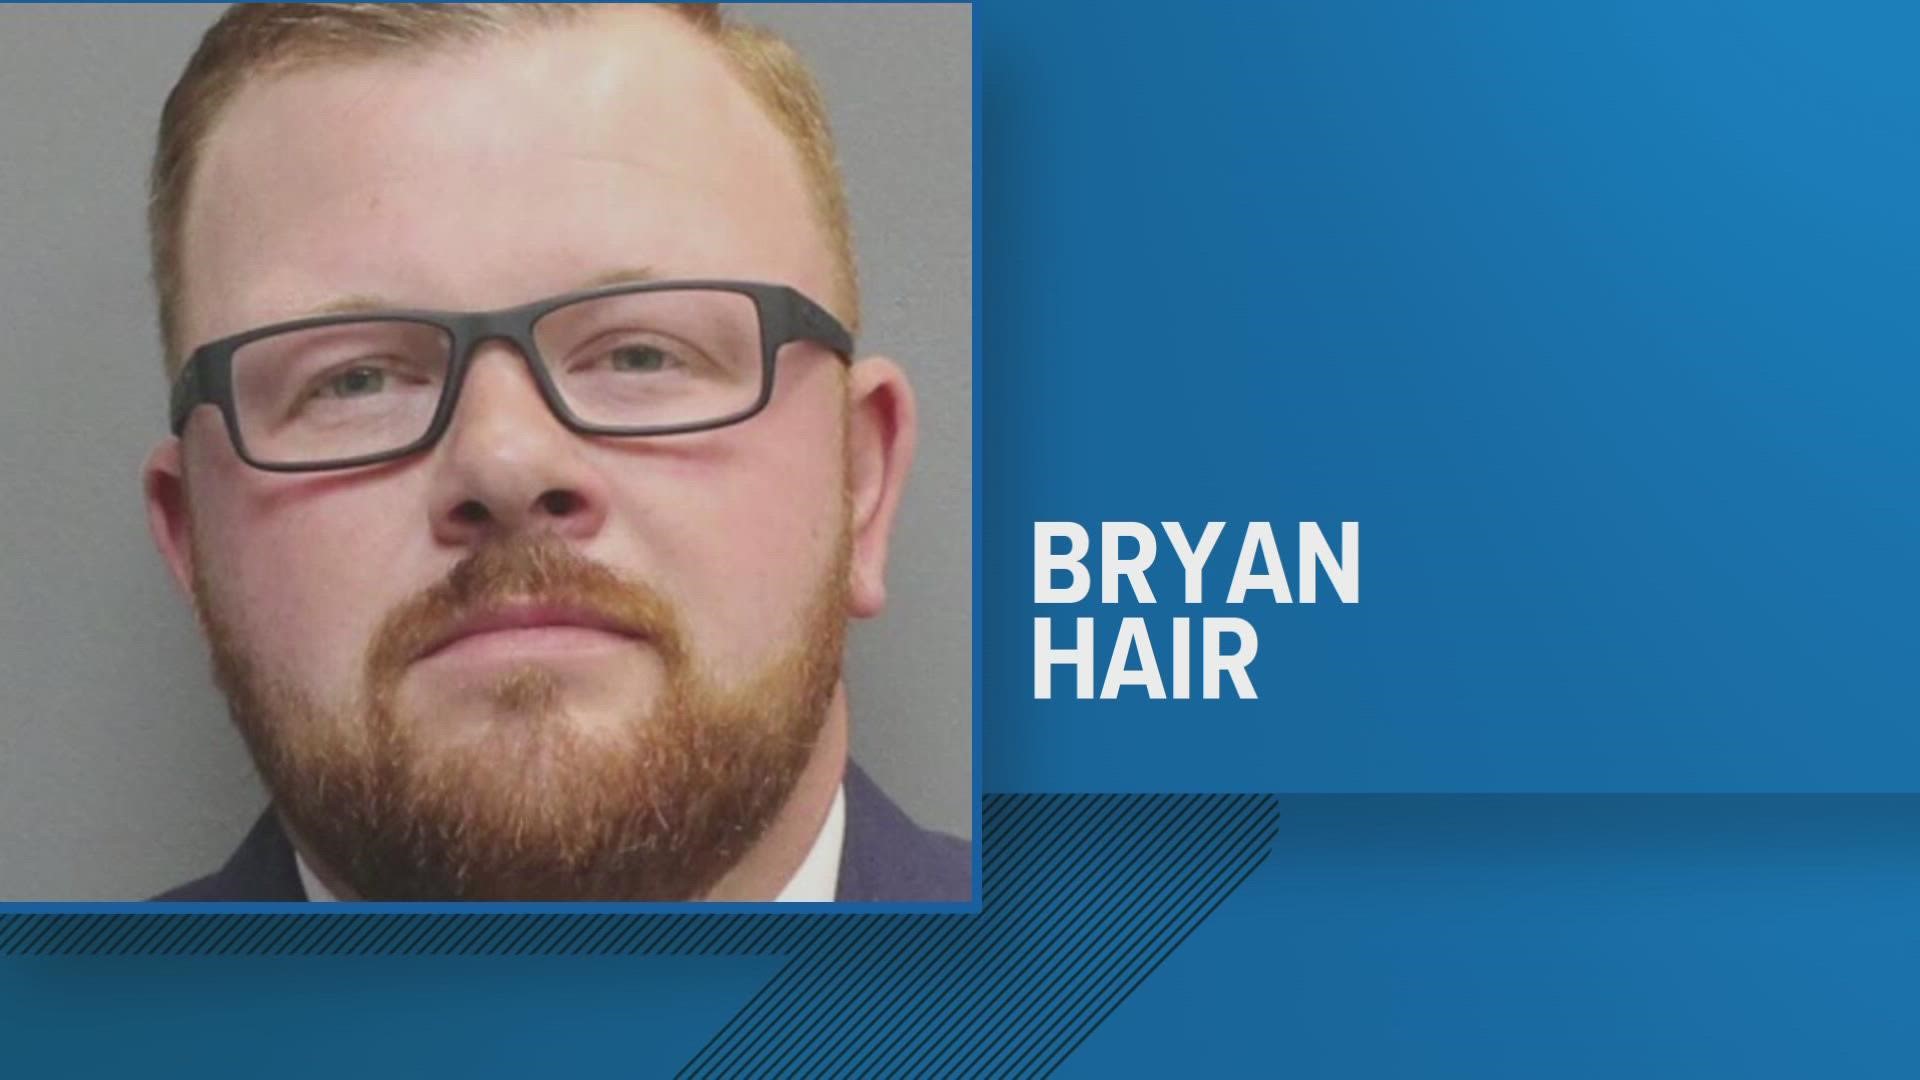 Bryan Hair appeared Tuesday before Judge Scott Green for sentencing.